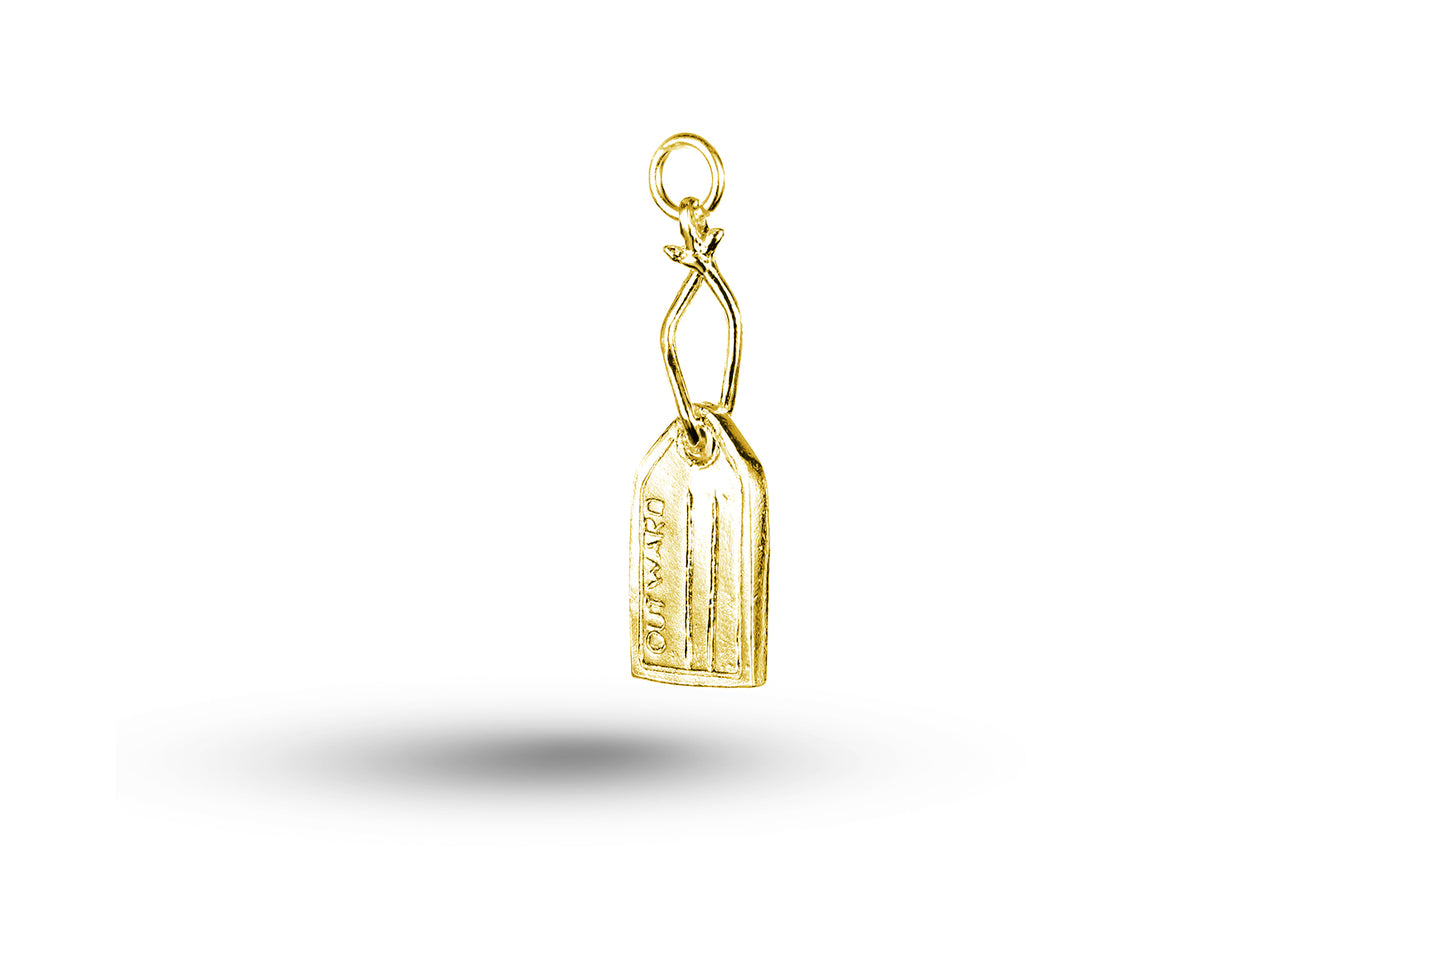 Yellow gold Luggage Label charm.